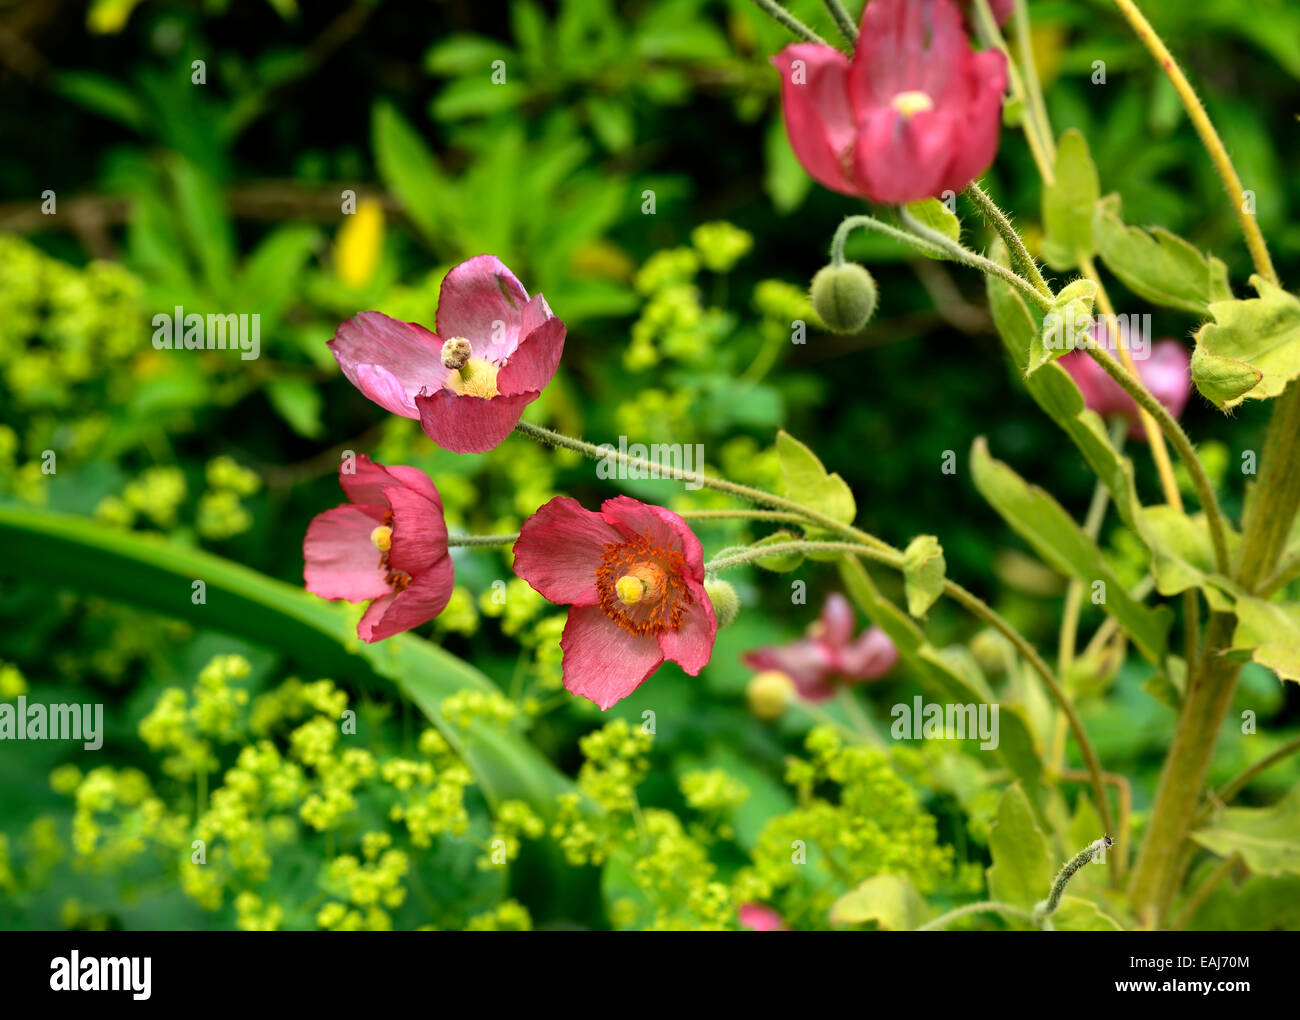 Meconopsis Napaulensis red poppy alchemilla mollis biennial Nepalese nepal Himalayan poppies flower flowers RM Floral Stock Photo